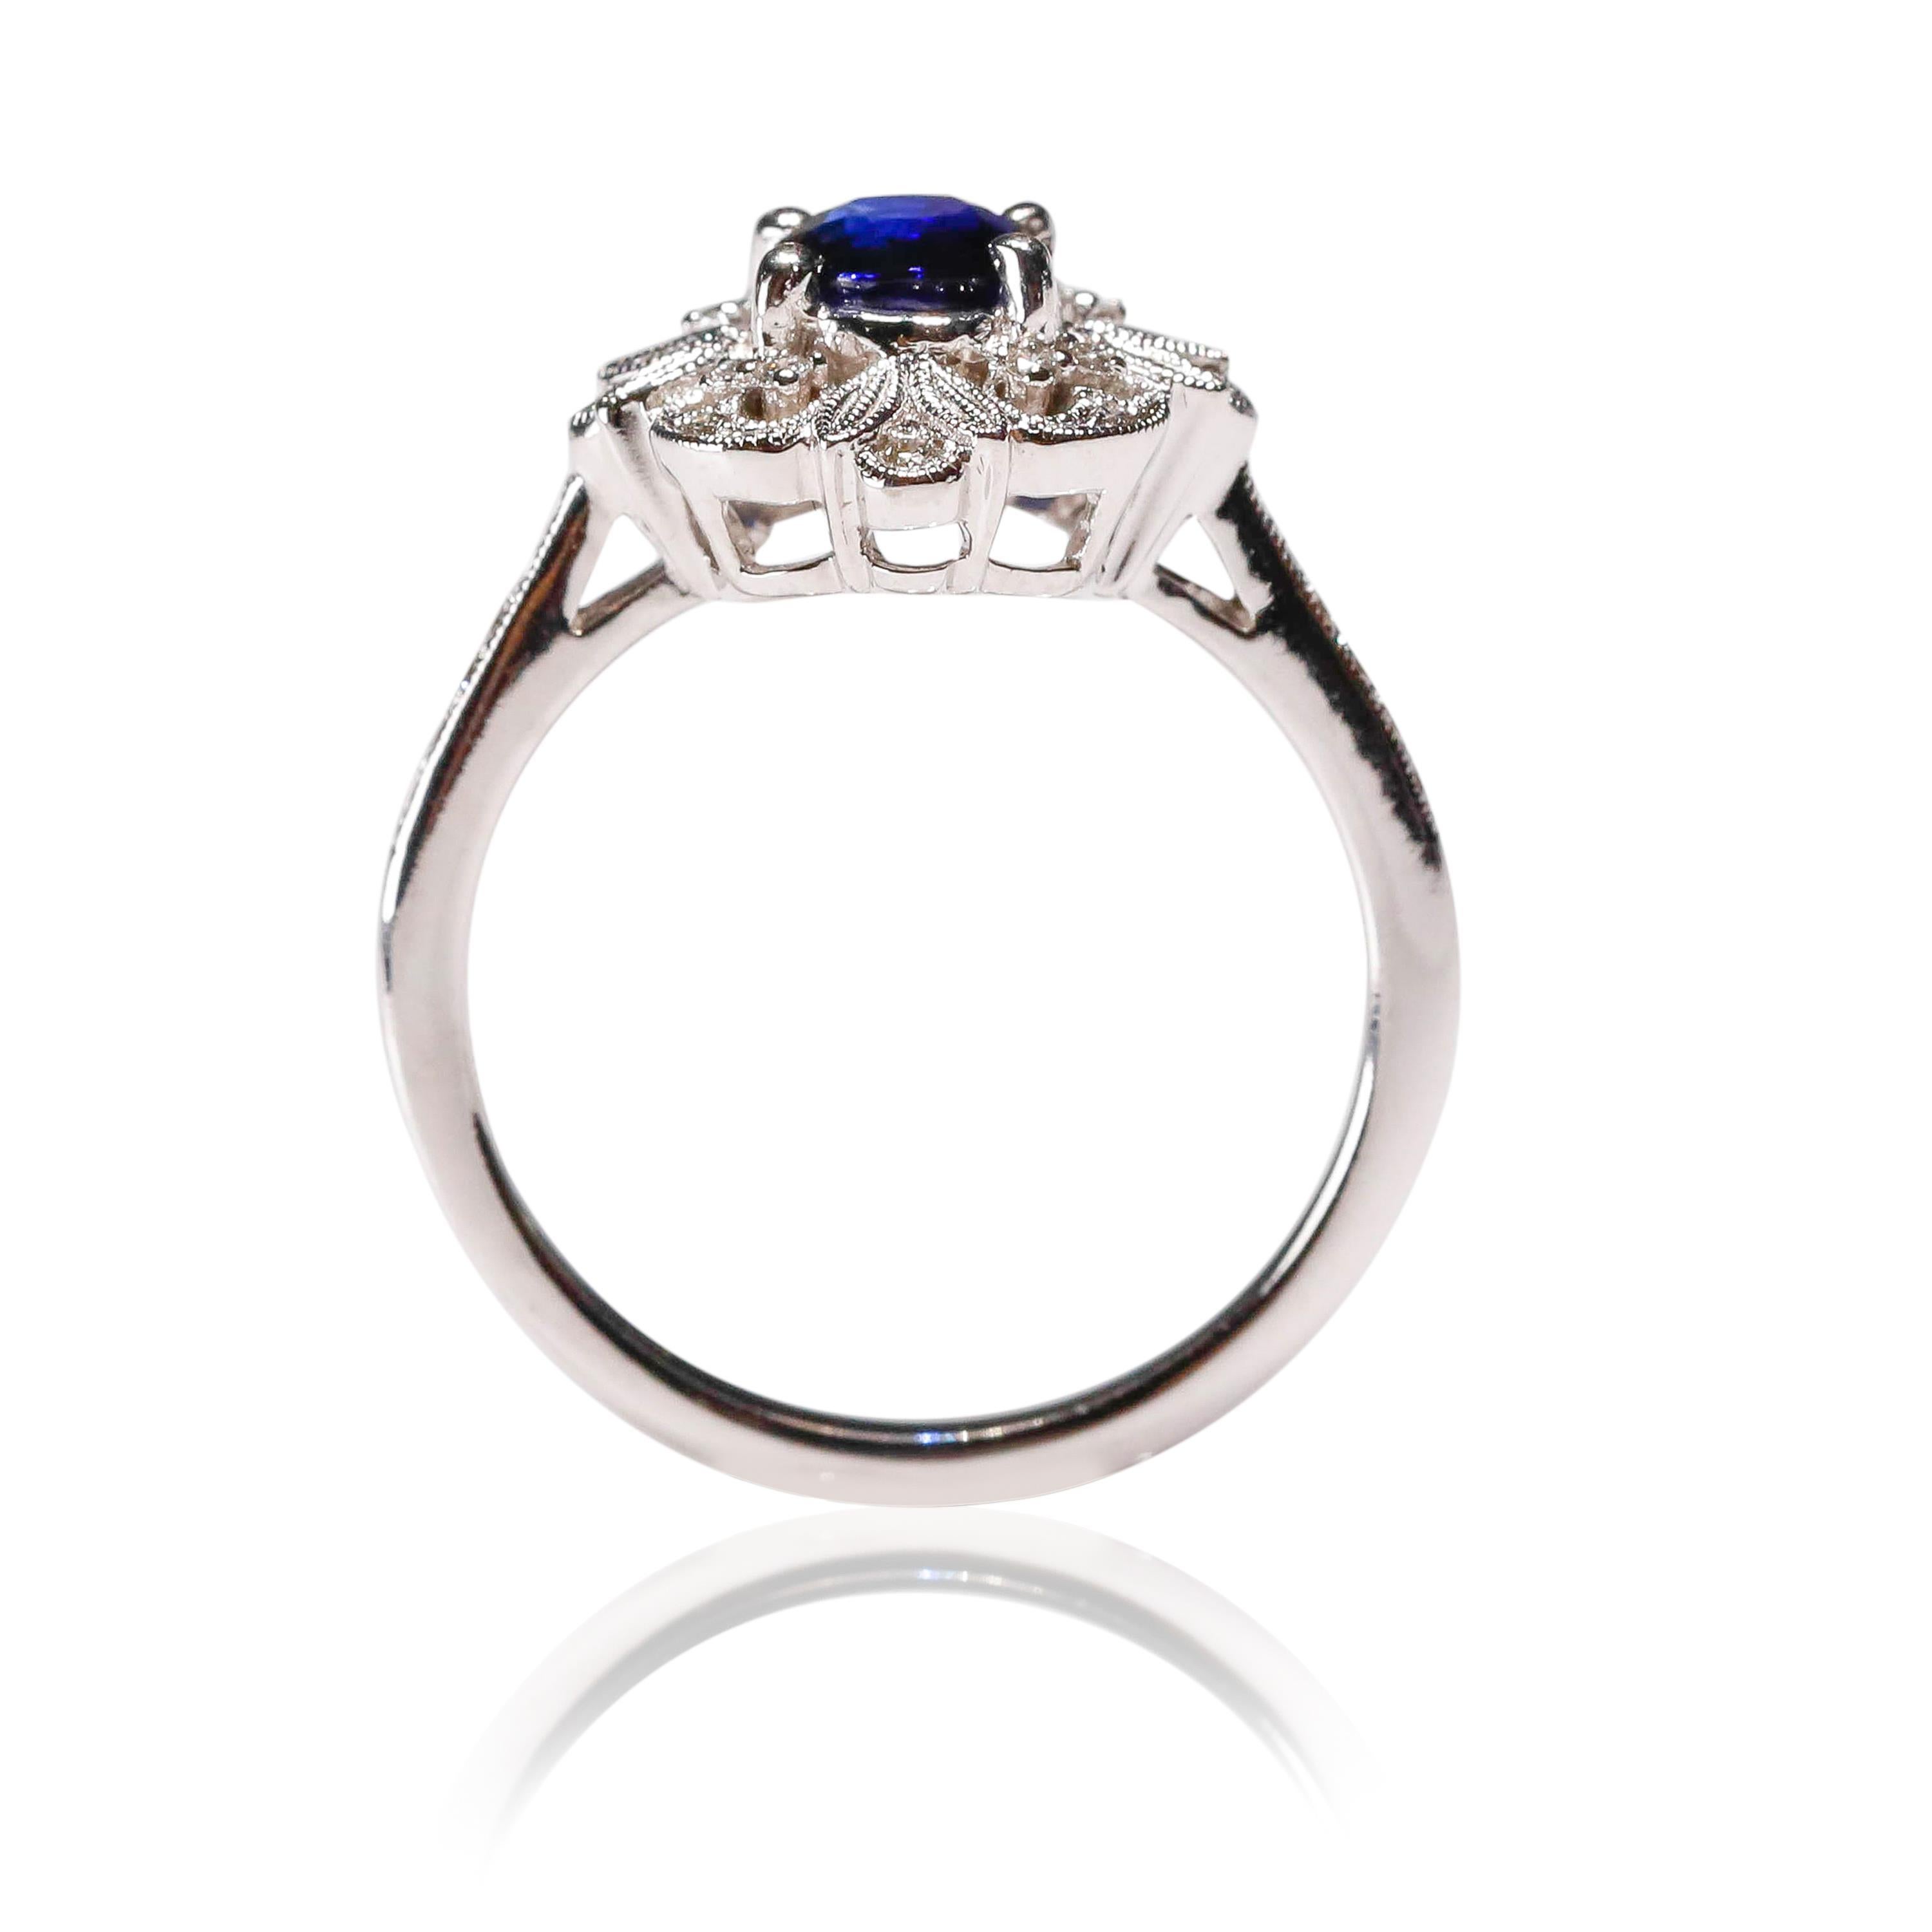 0.87 Carat blue Sapphire 0.13 Carat white Diamond 18 Karat Gold Floral Halo Ring

Crafted in 18 kt White Gold, this Unique design showcases a Blue Sapphire 0.87 TCW Oval shaped Sapphire, set in a halo of round-cut mesmerizing diamonds, Polished to a